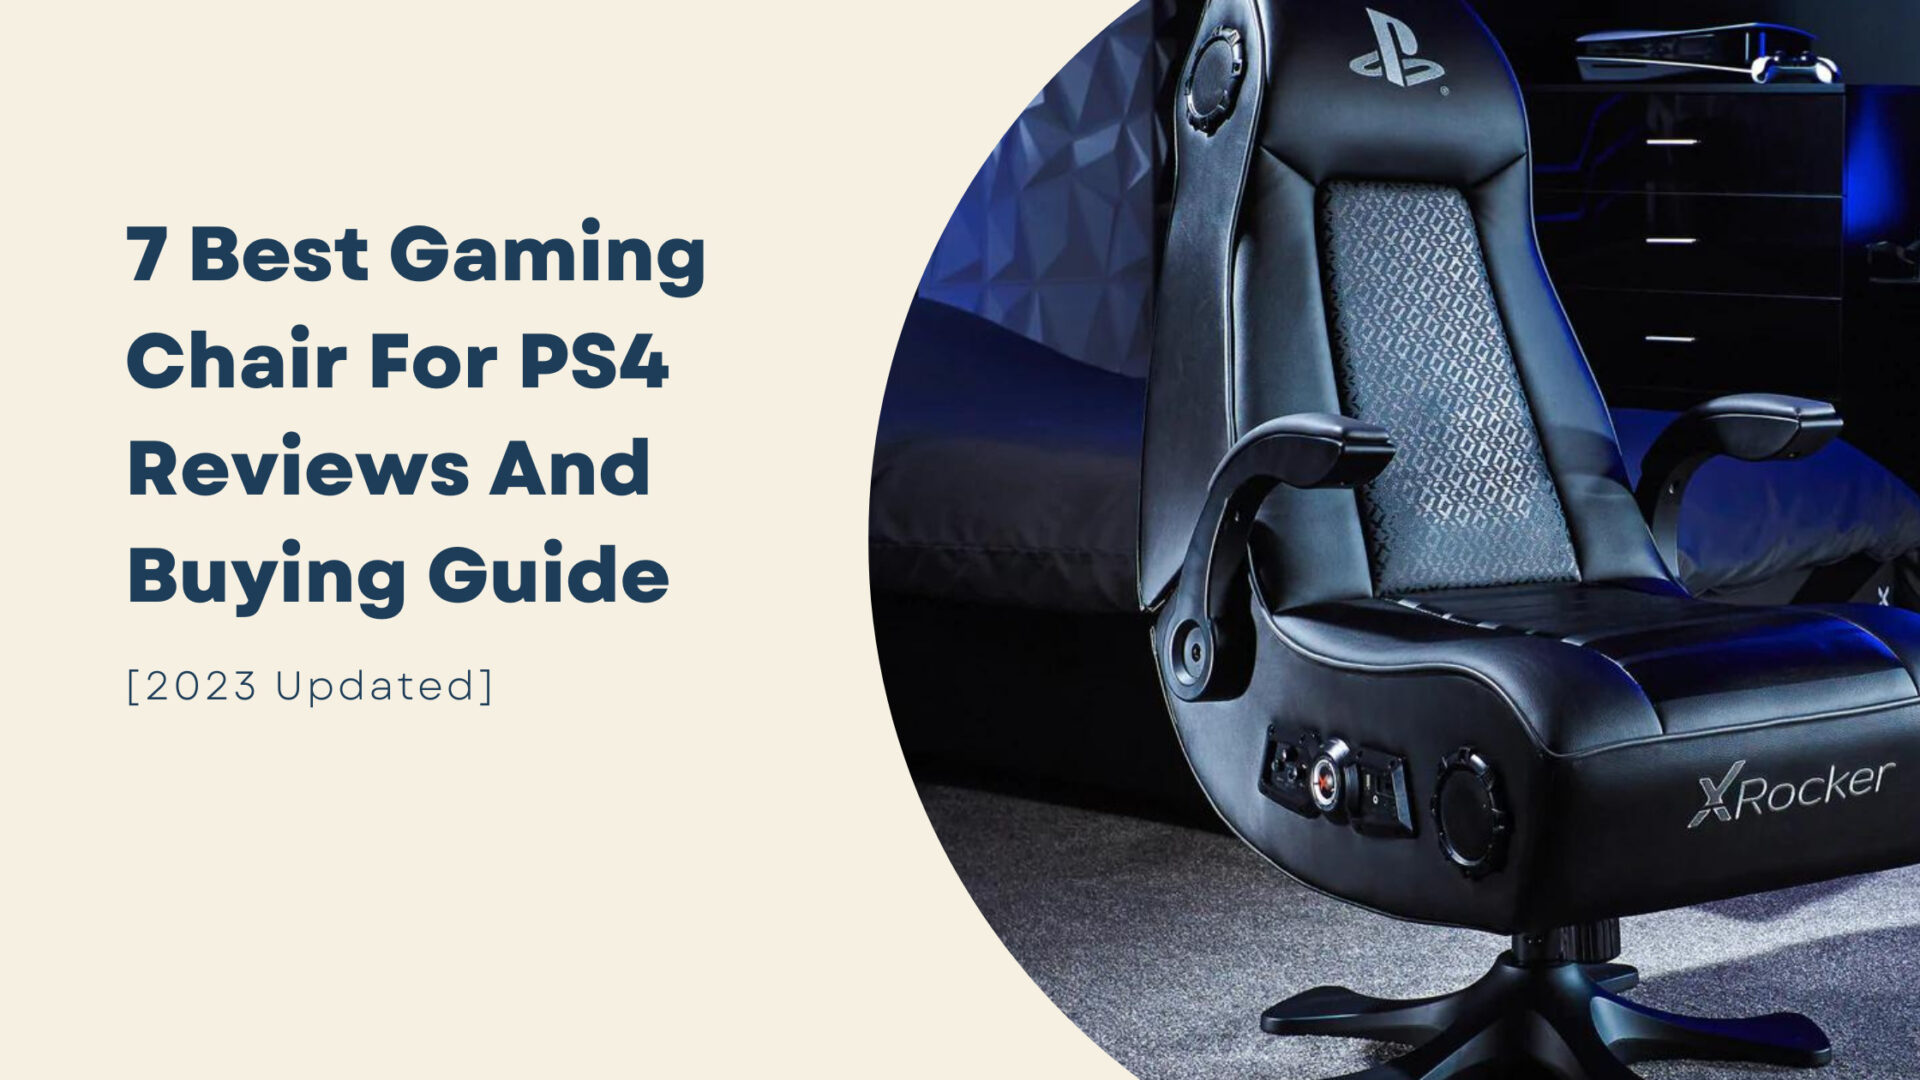 Best Gaming Chair For PS4